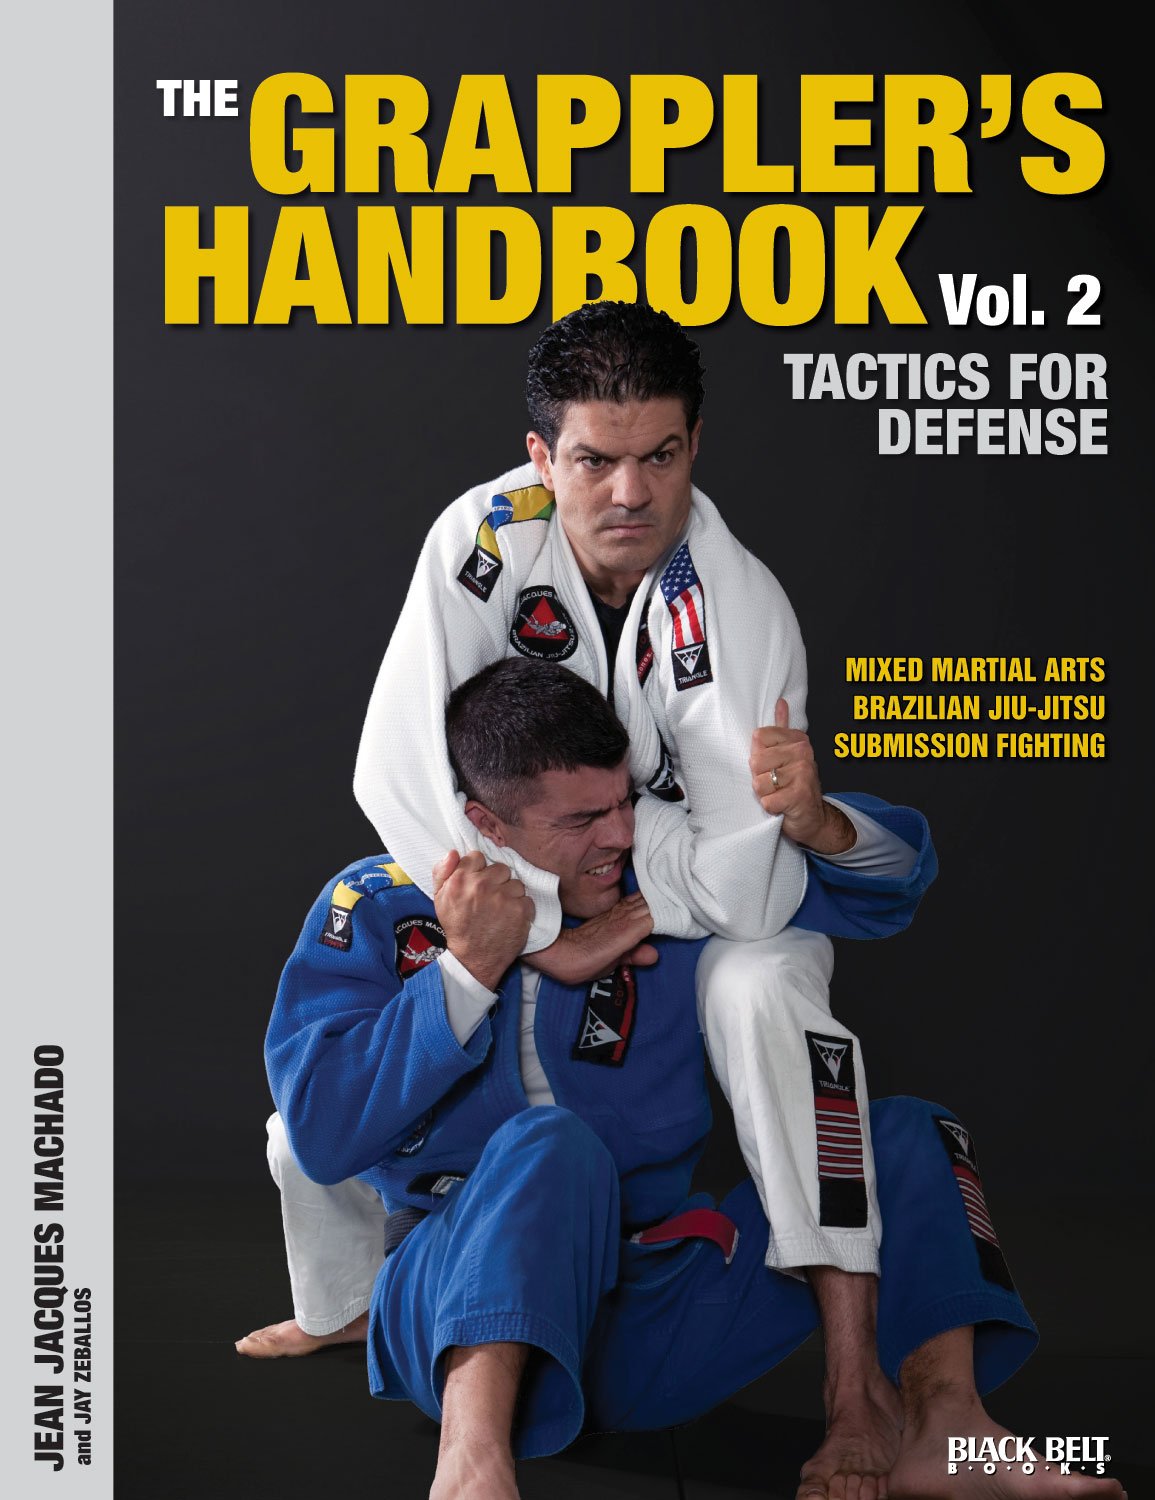 The Grappler's Handbook: Tactics for Defense Mixed Martial Arts, BJJ, Submission Fighting Book 2 by Jean Jacques Machado (Preowned) - Budovideos Inc